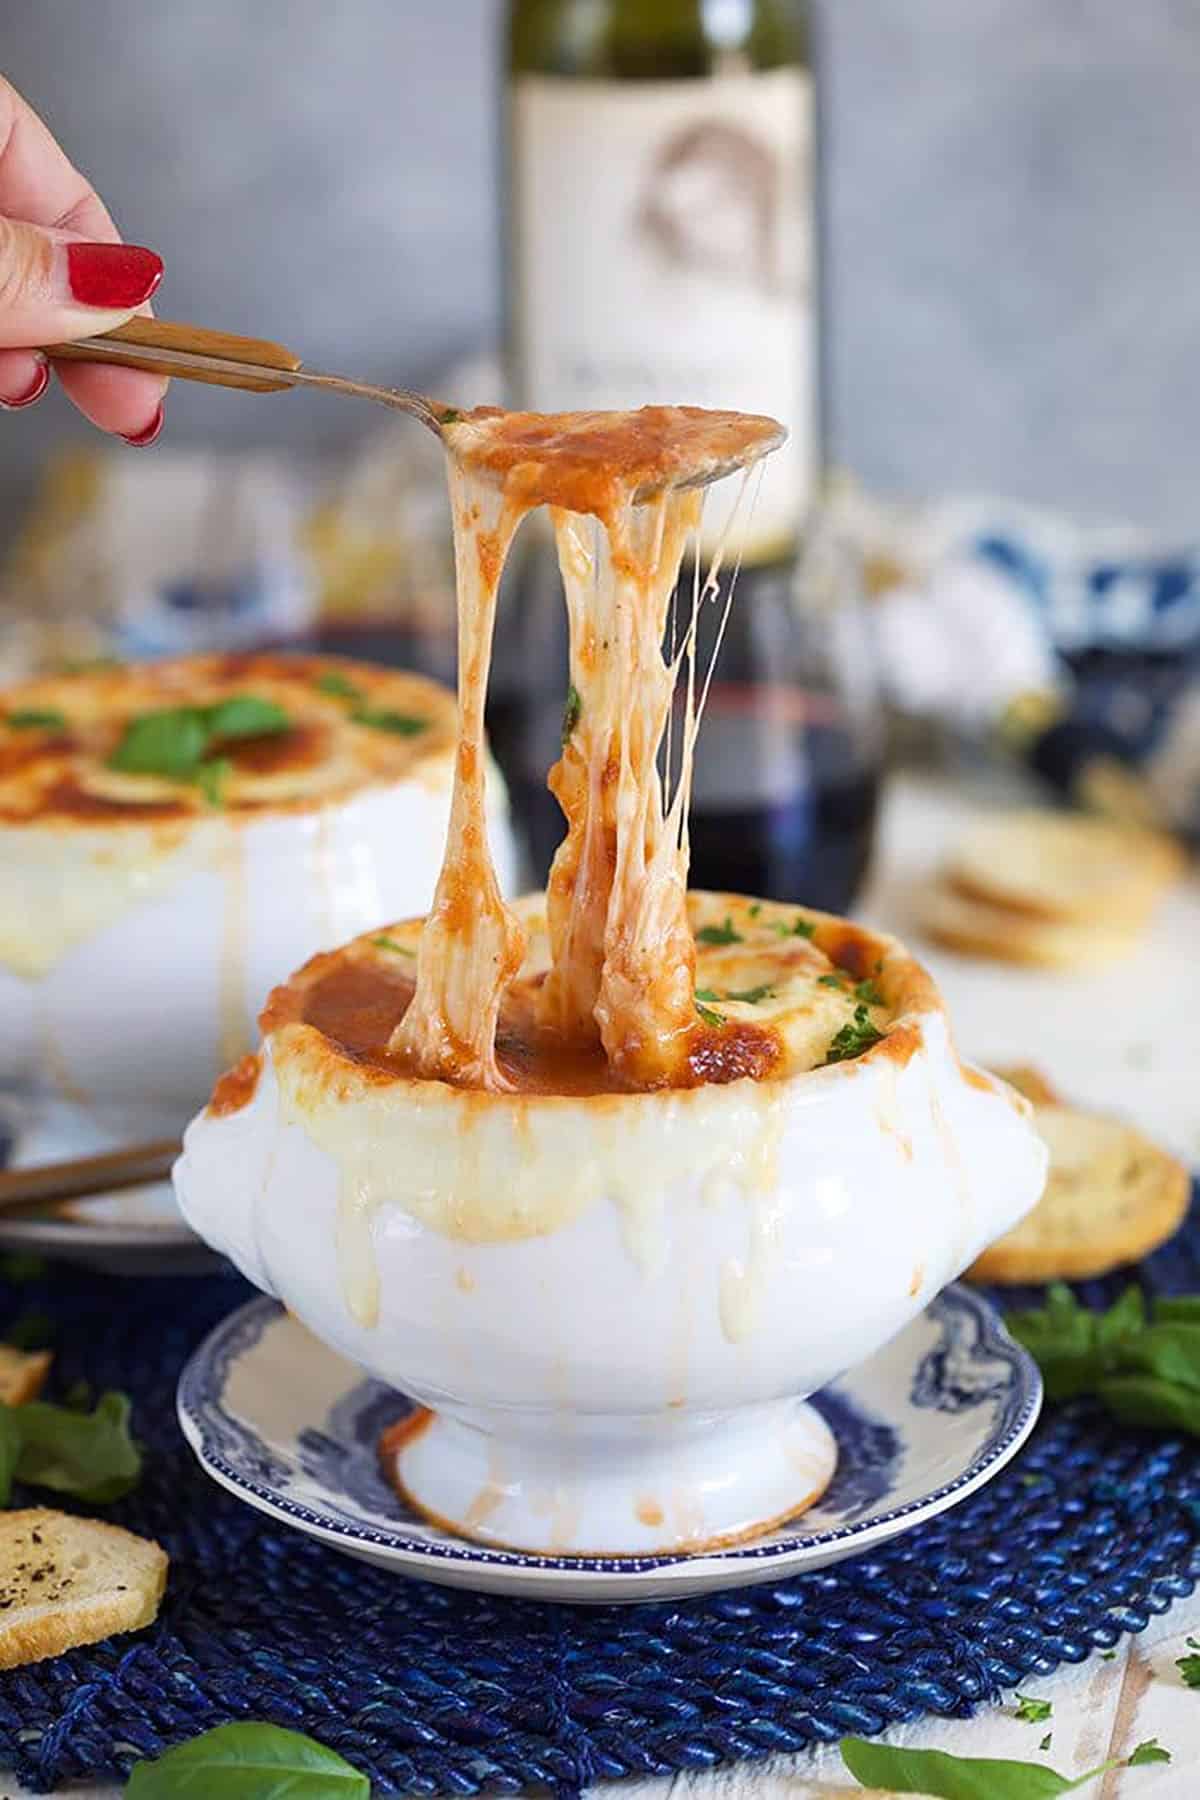 Super cheesy Baked Tomato Bisque with a spoon pulling melty cheese.